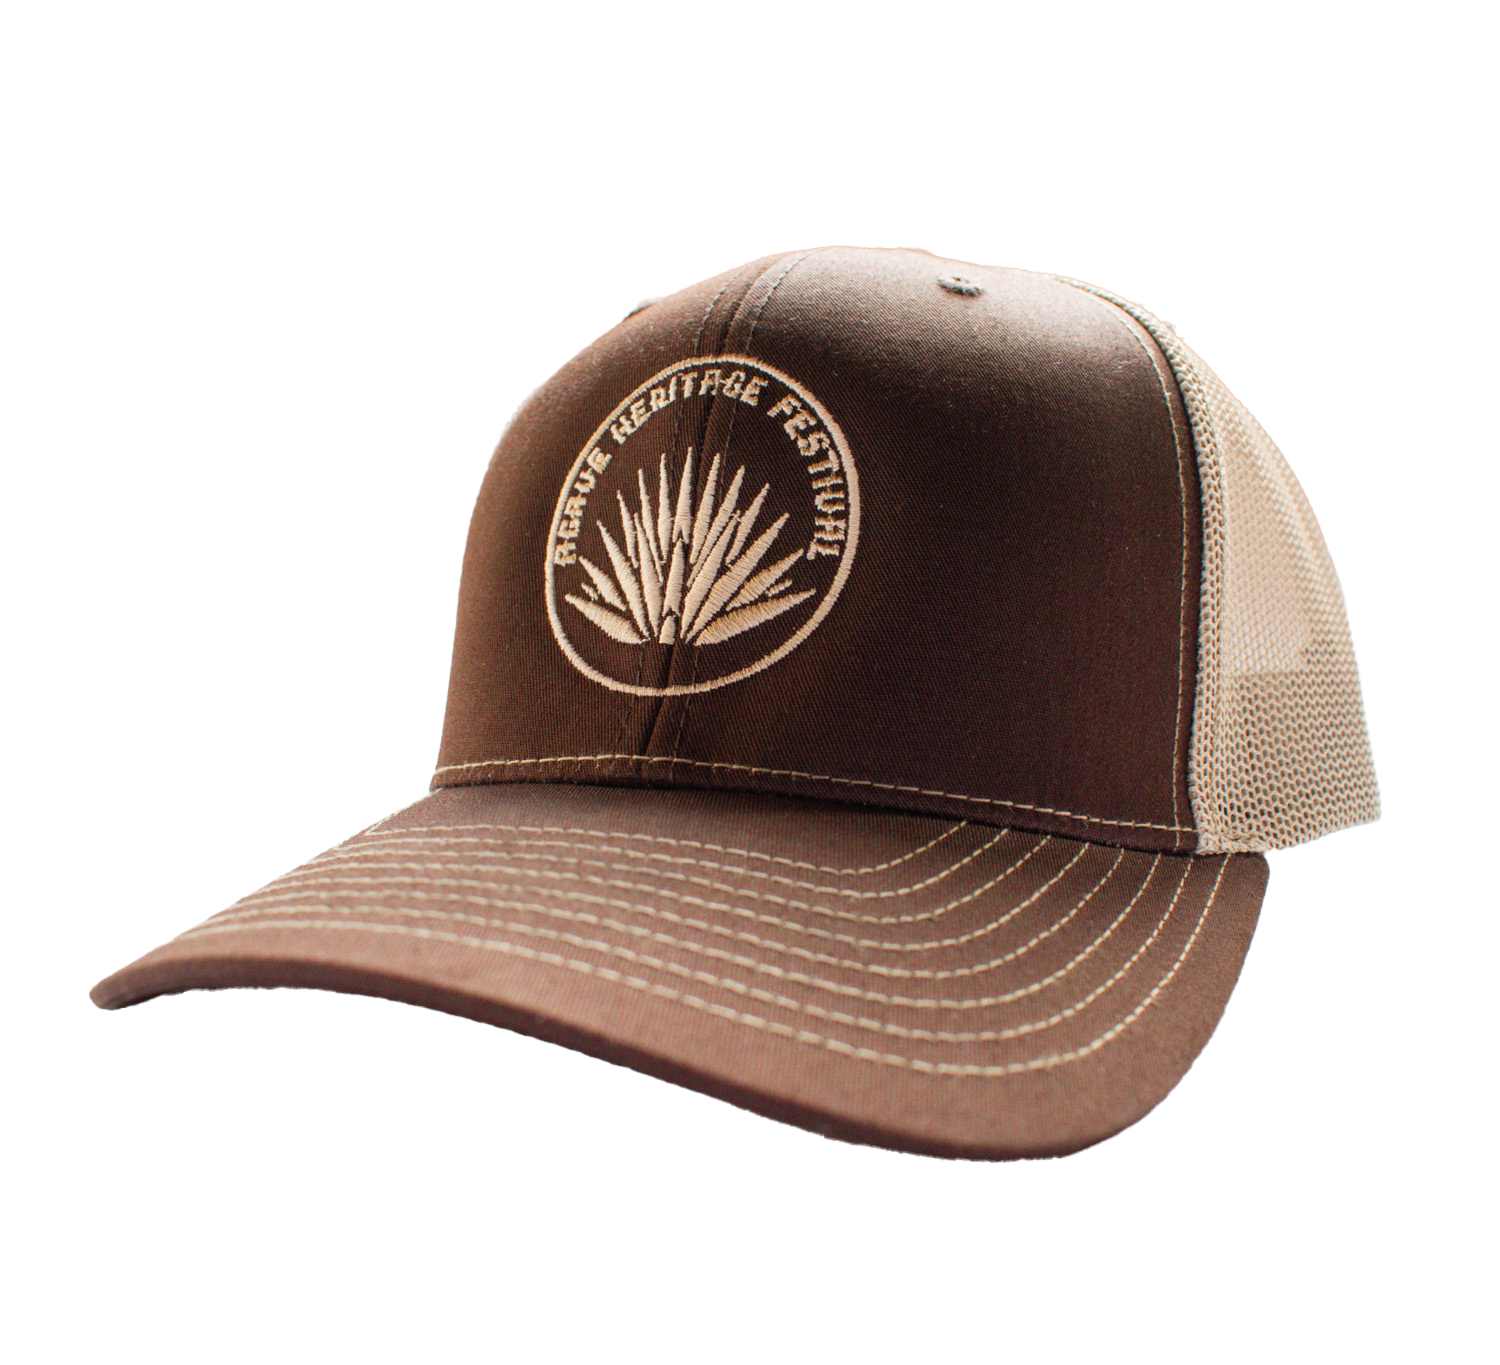 Agave Heritage Festival Embroidered Cap